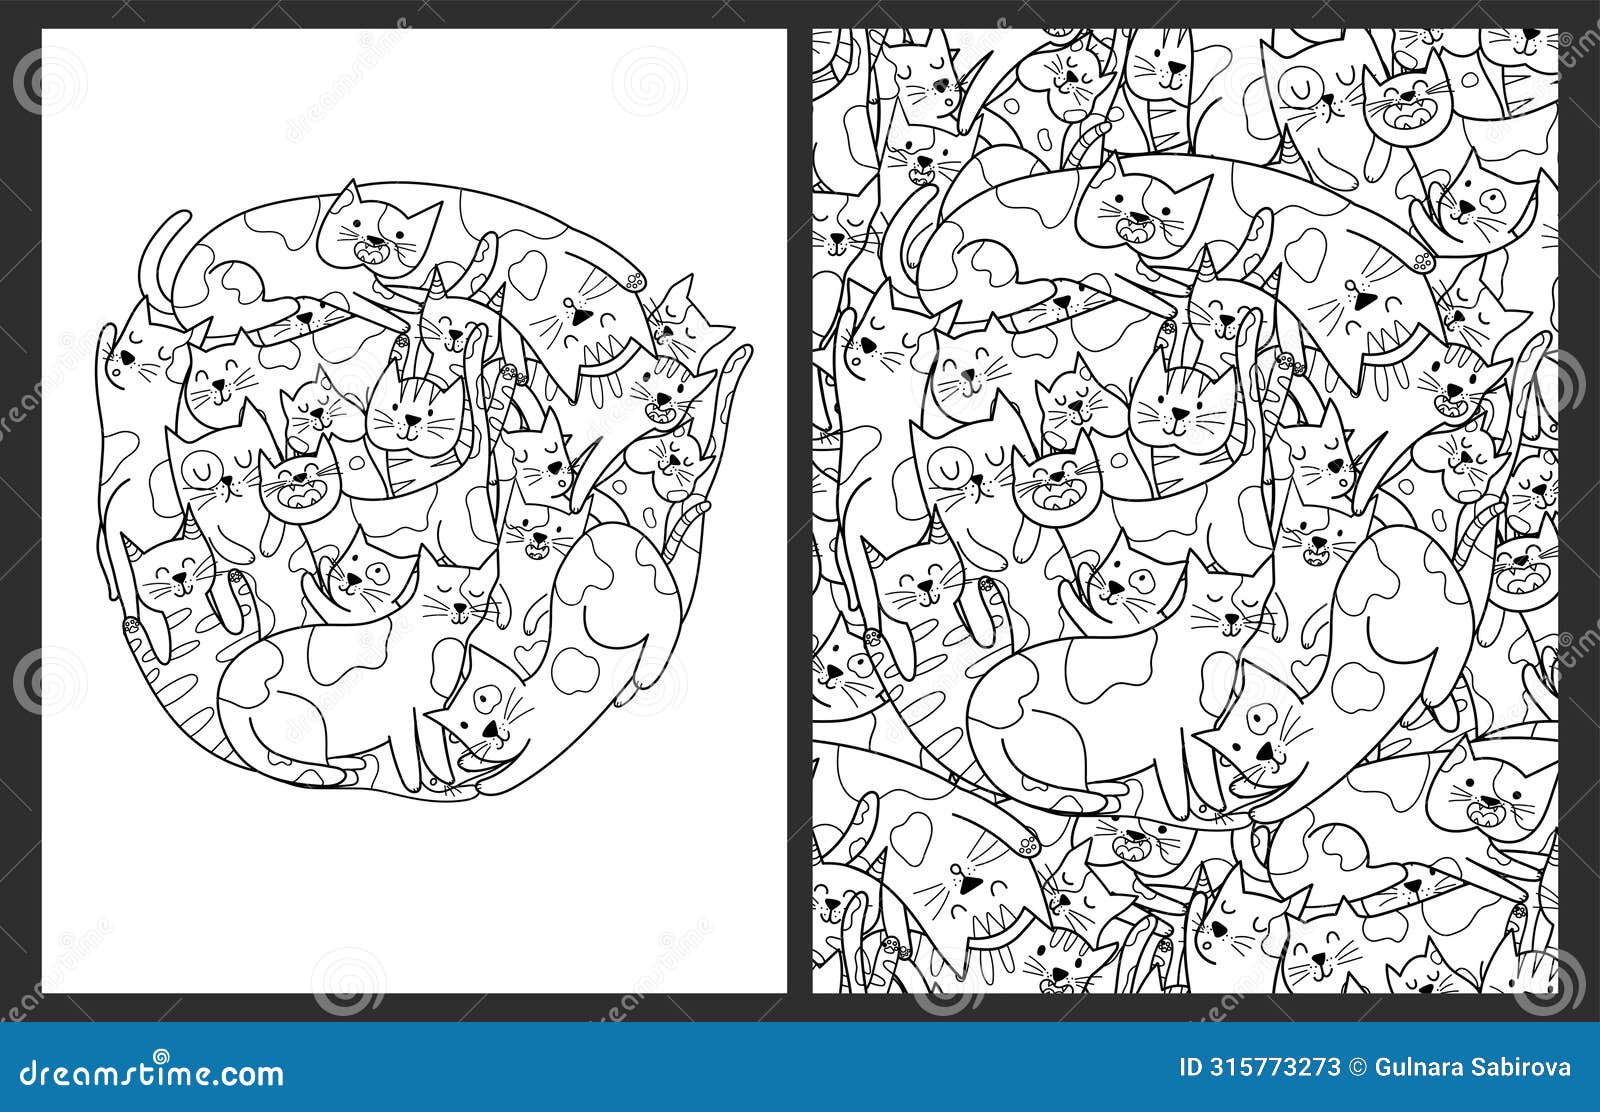 coloring pages set with cute cats. doodle feline animals templates for coloring book